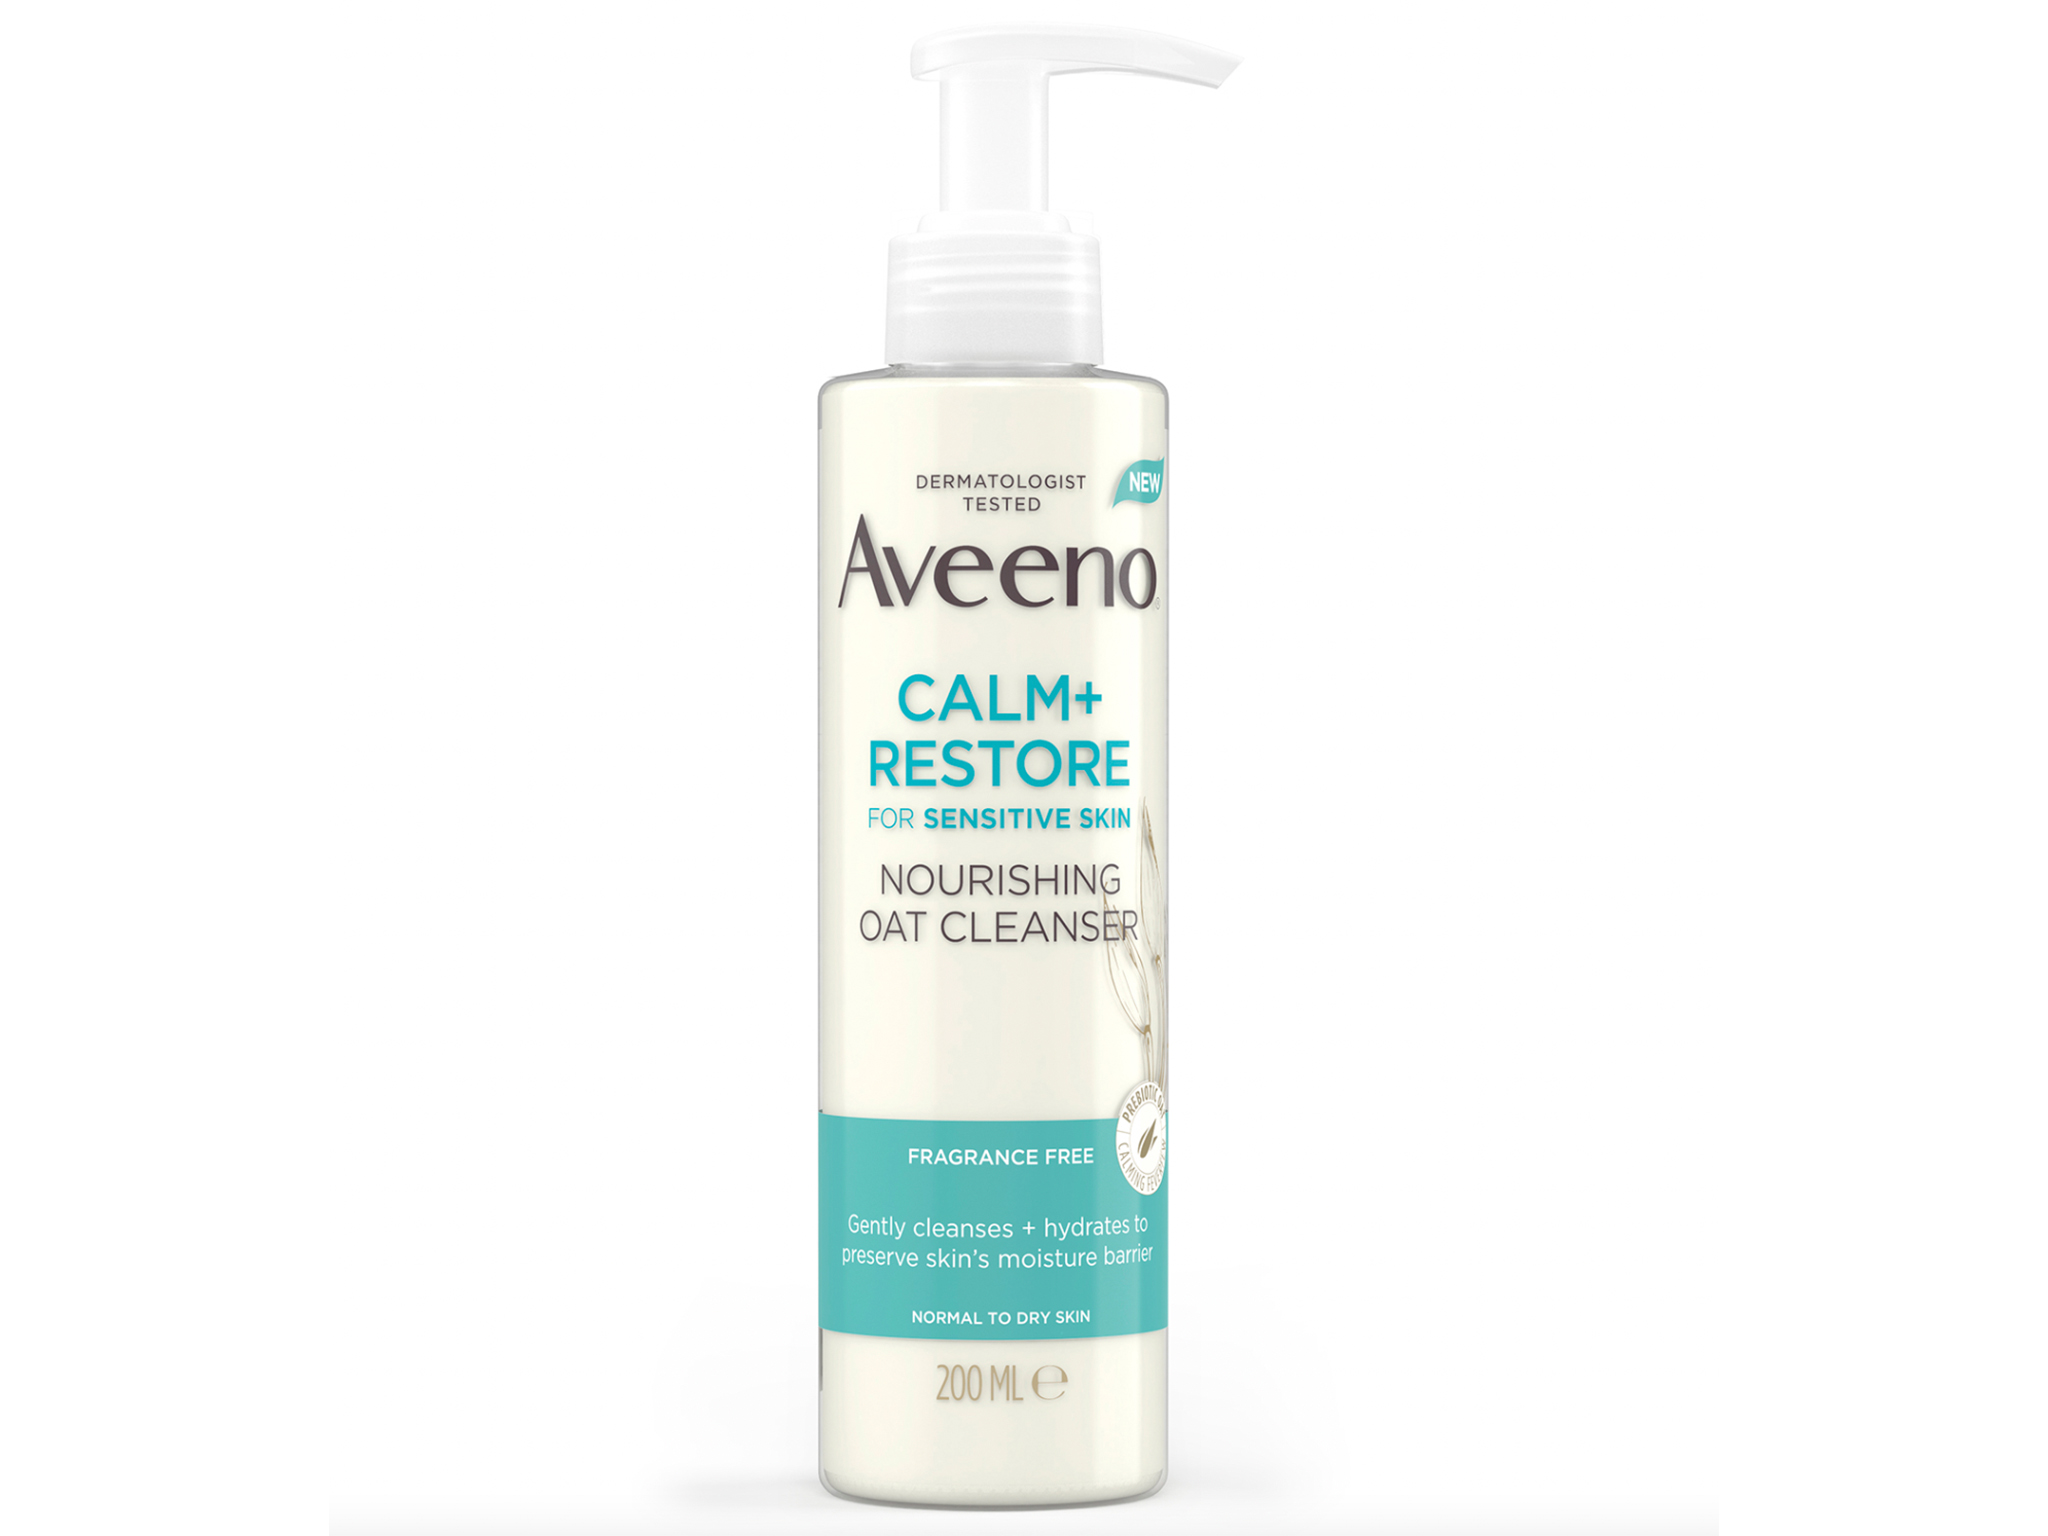 Aveeno face calm and restore cleanser